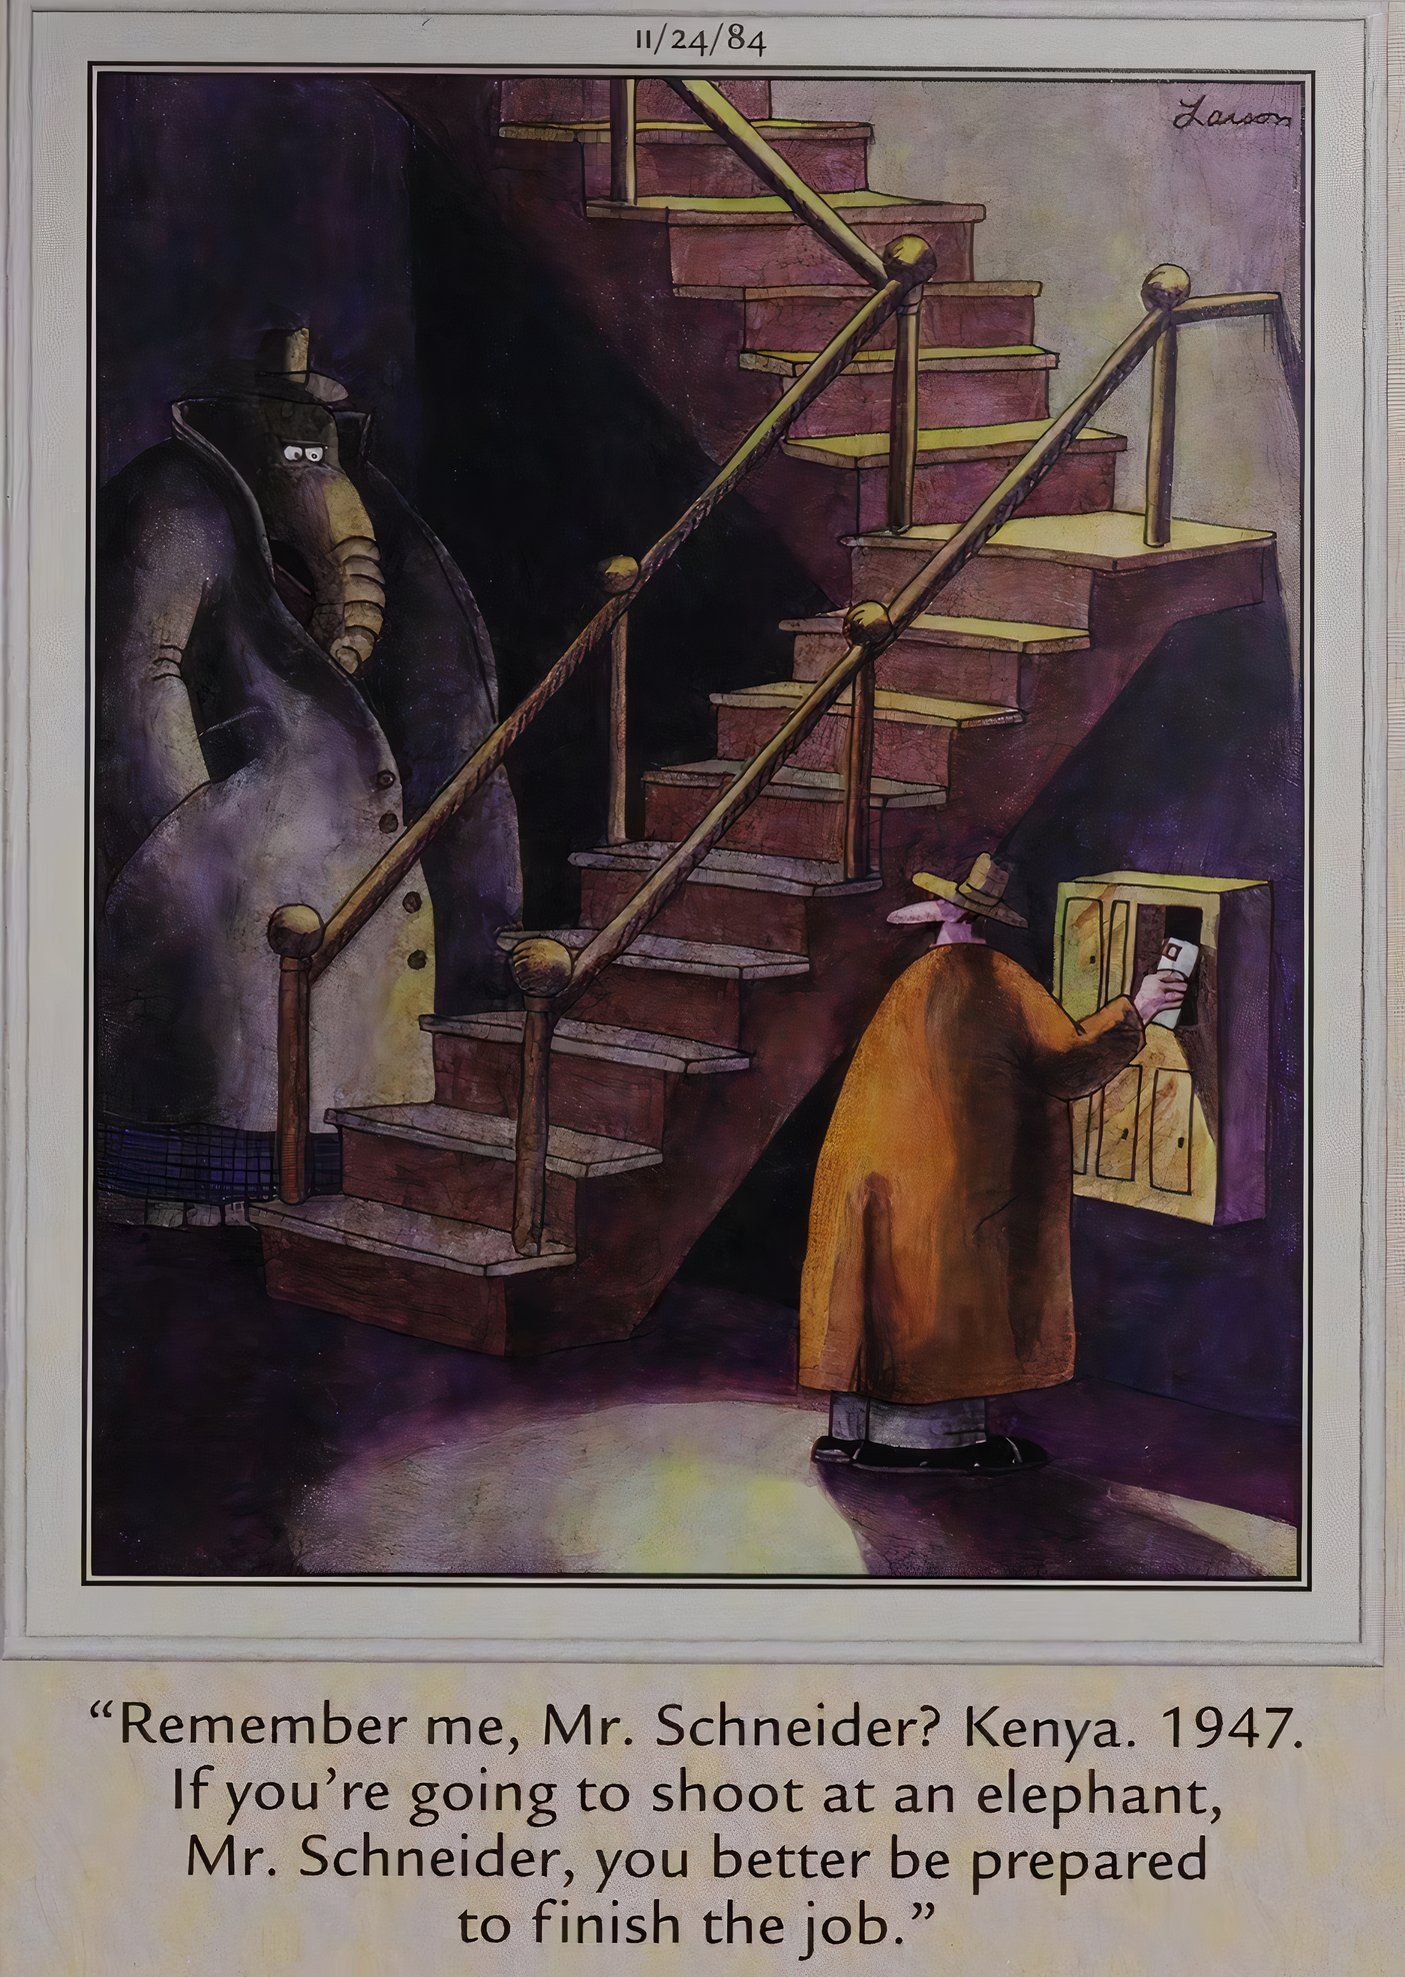 Far Side, elephant in a trench coat confronts man who shot him years earlier